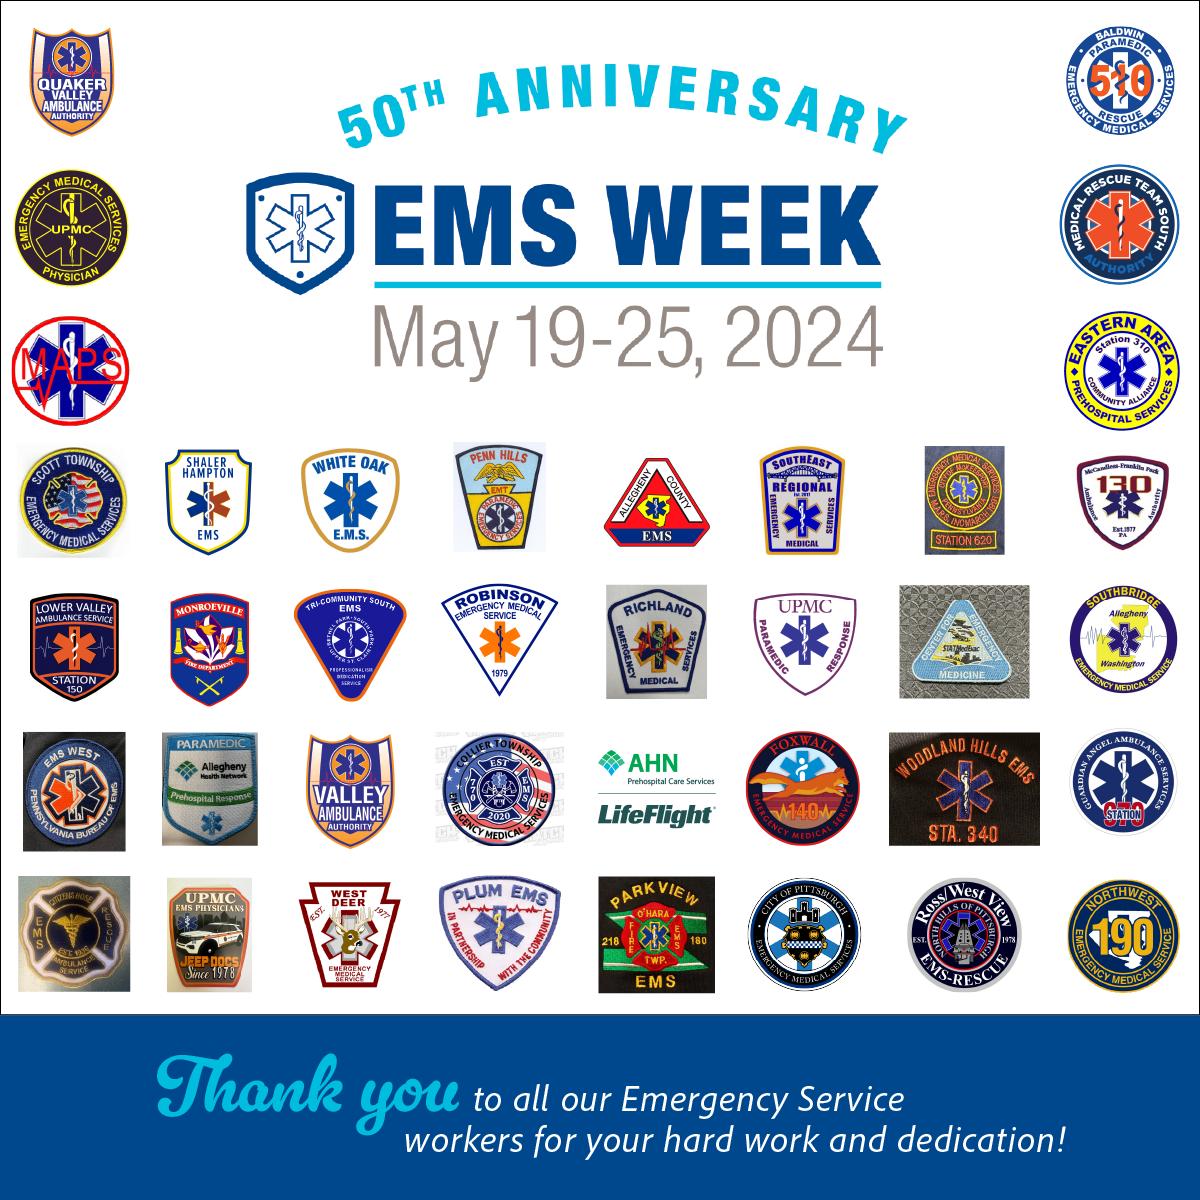 This week marks the 50th anniversary of National EMS Week, a time to express our gratitude to the EMTs and paramedics who selflessly provide care to those in need every day. We want to extend a special thank you to our dedicated Emergency Service workers in Allegheny County.